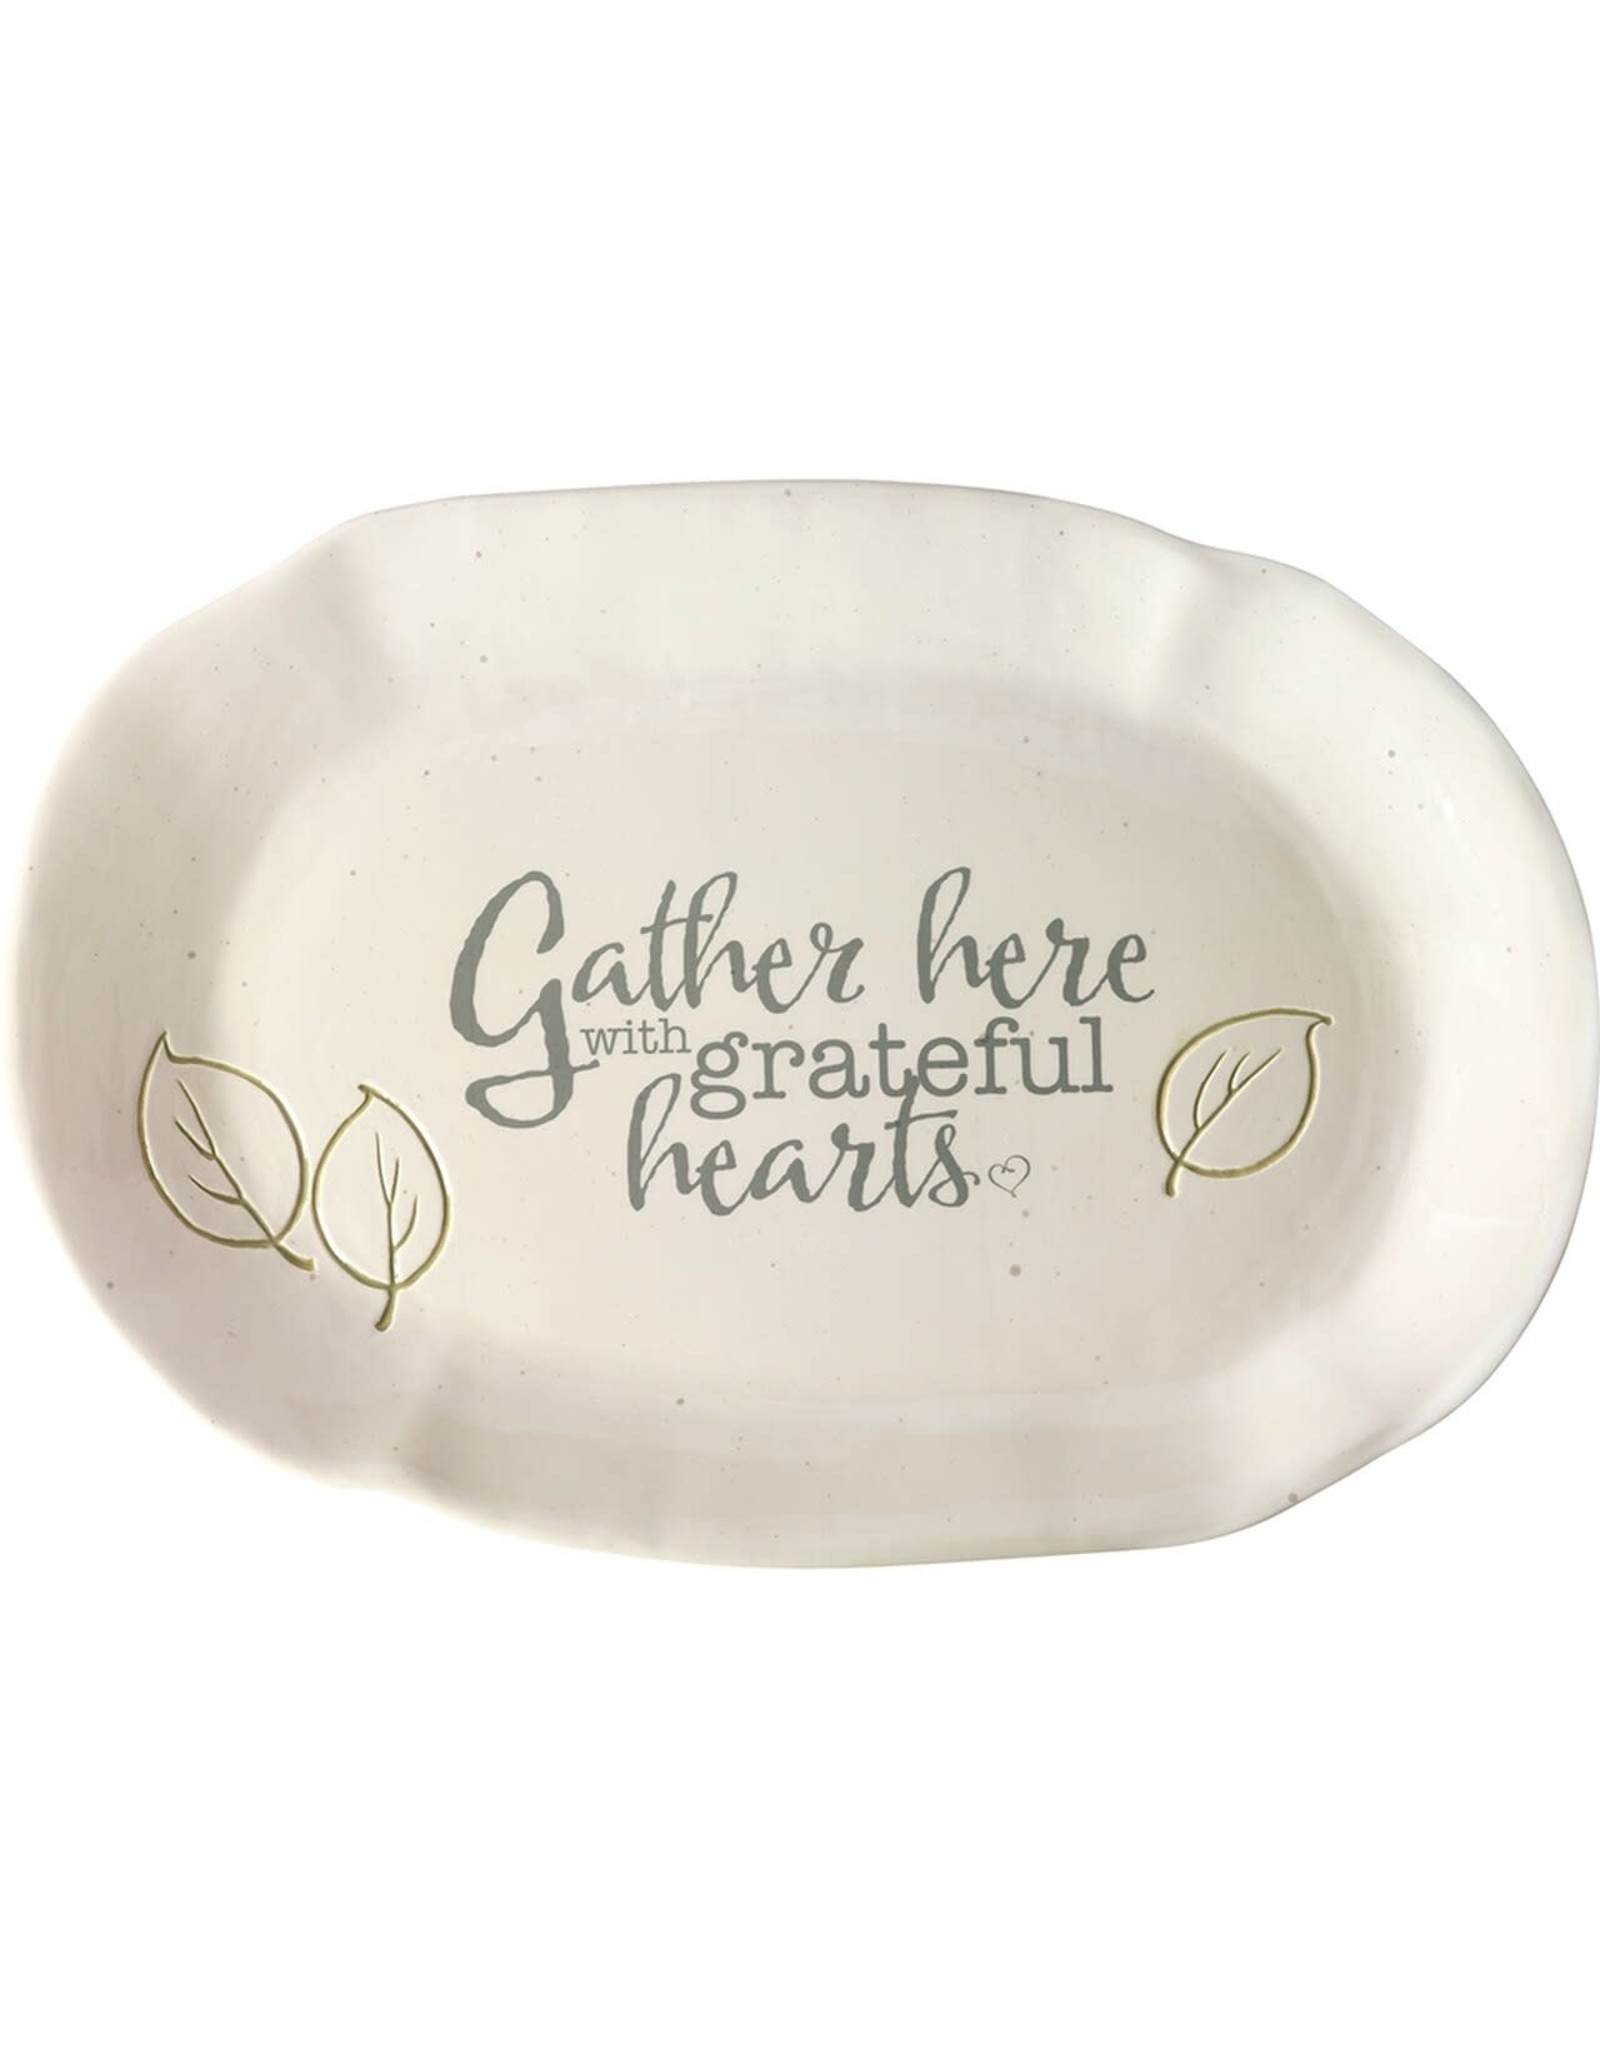 Precious Moments Gather Here With Grateful Hearts Ceramic Oval Serving Platter